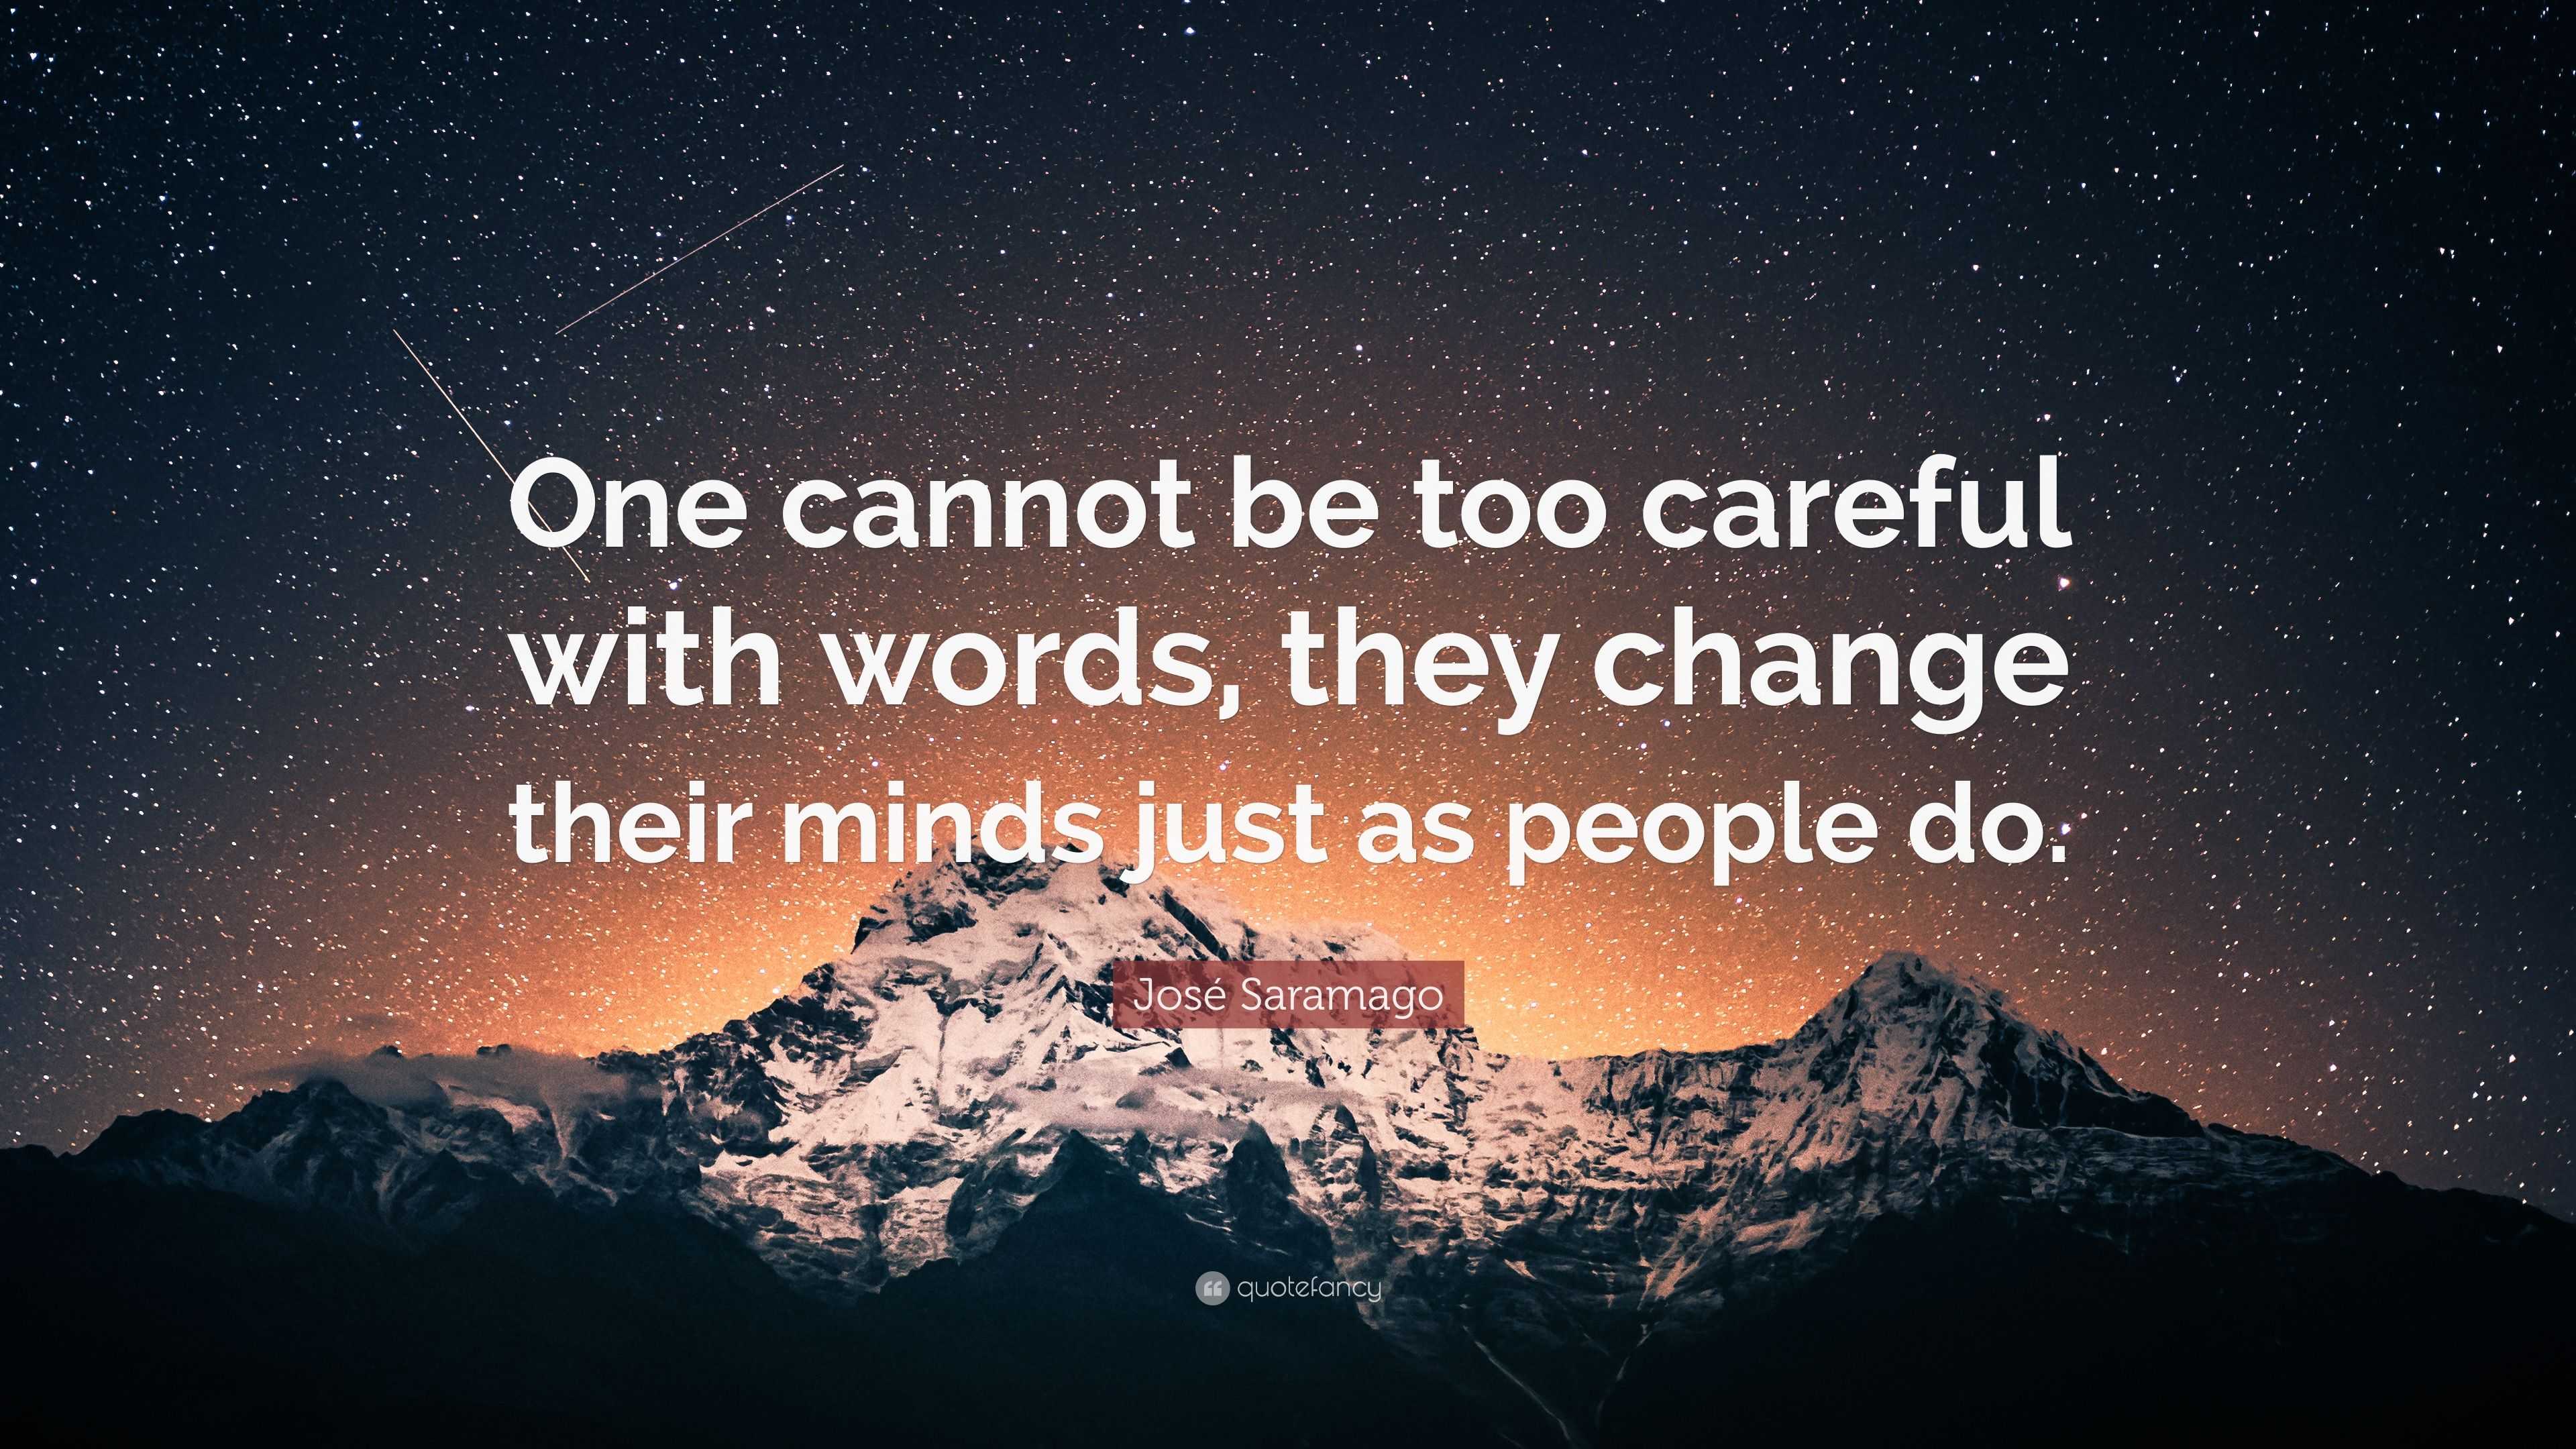 José Saramago Quote: “One cannot be too careful with words, they change ...